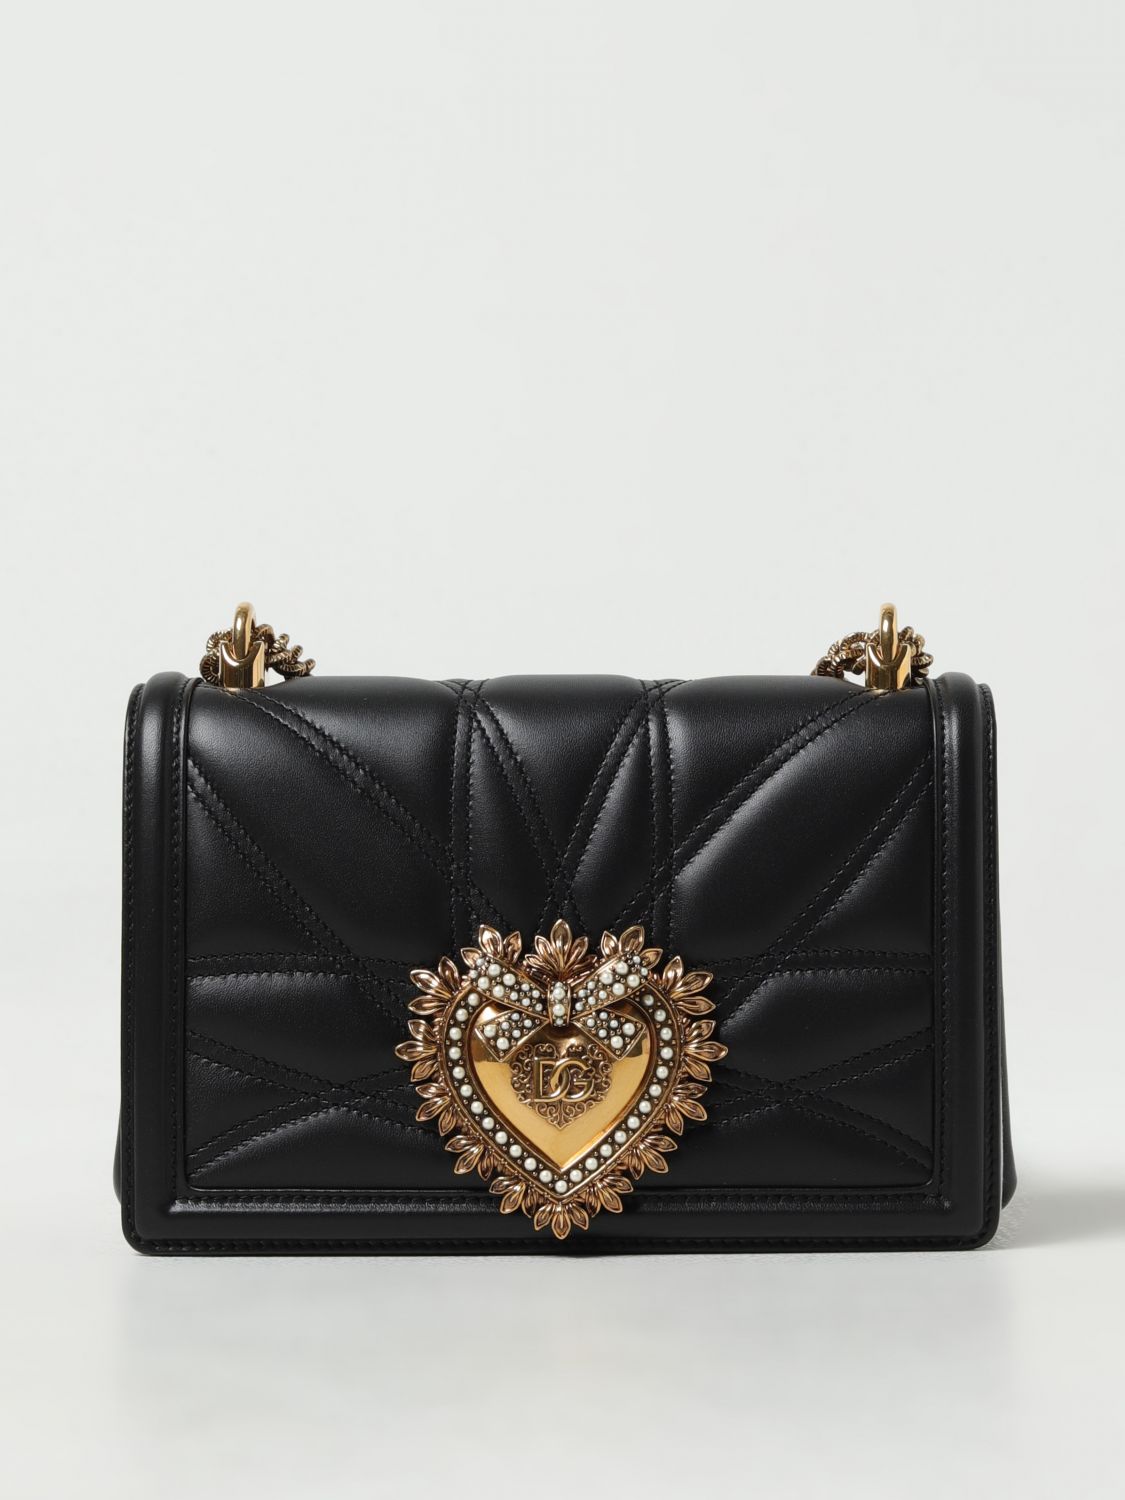 Dolce & Gabbana Devotion Bag In Quilted Leather In Black